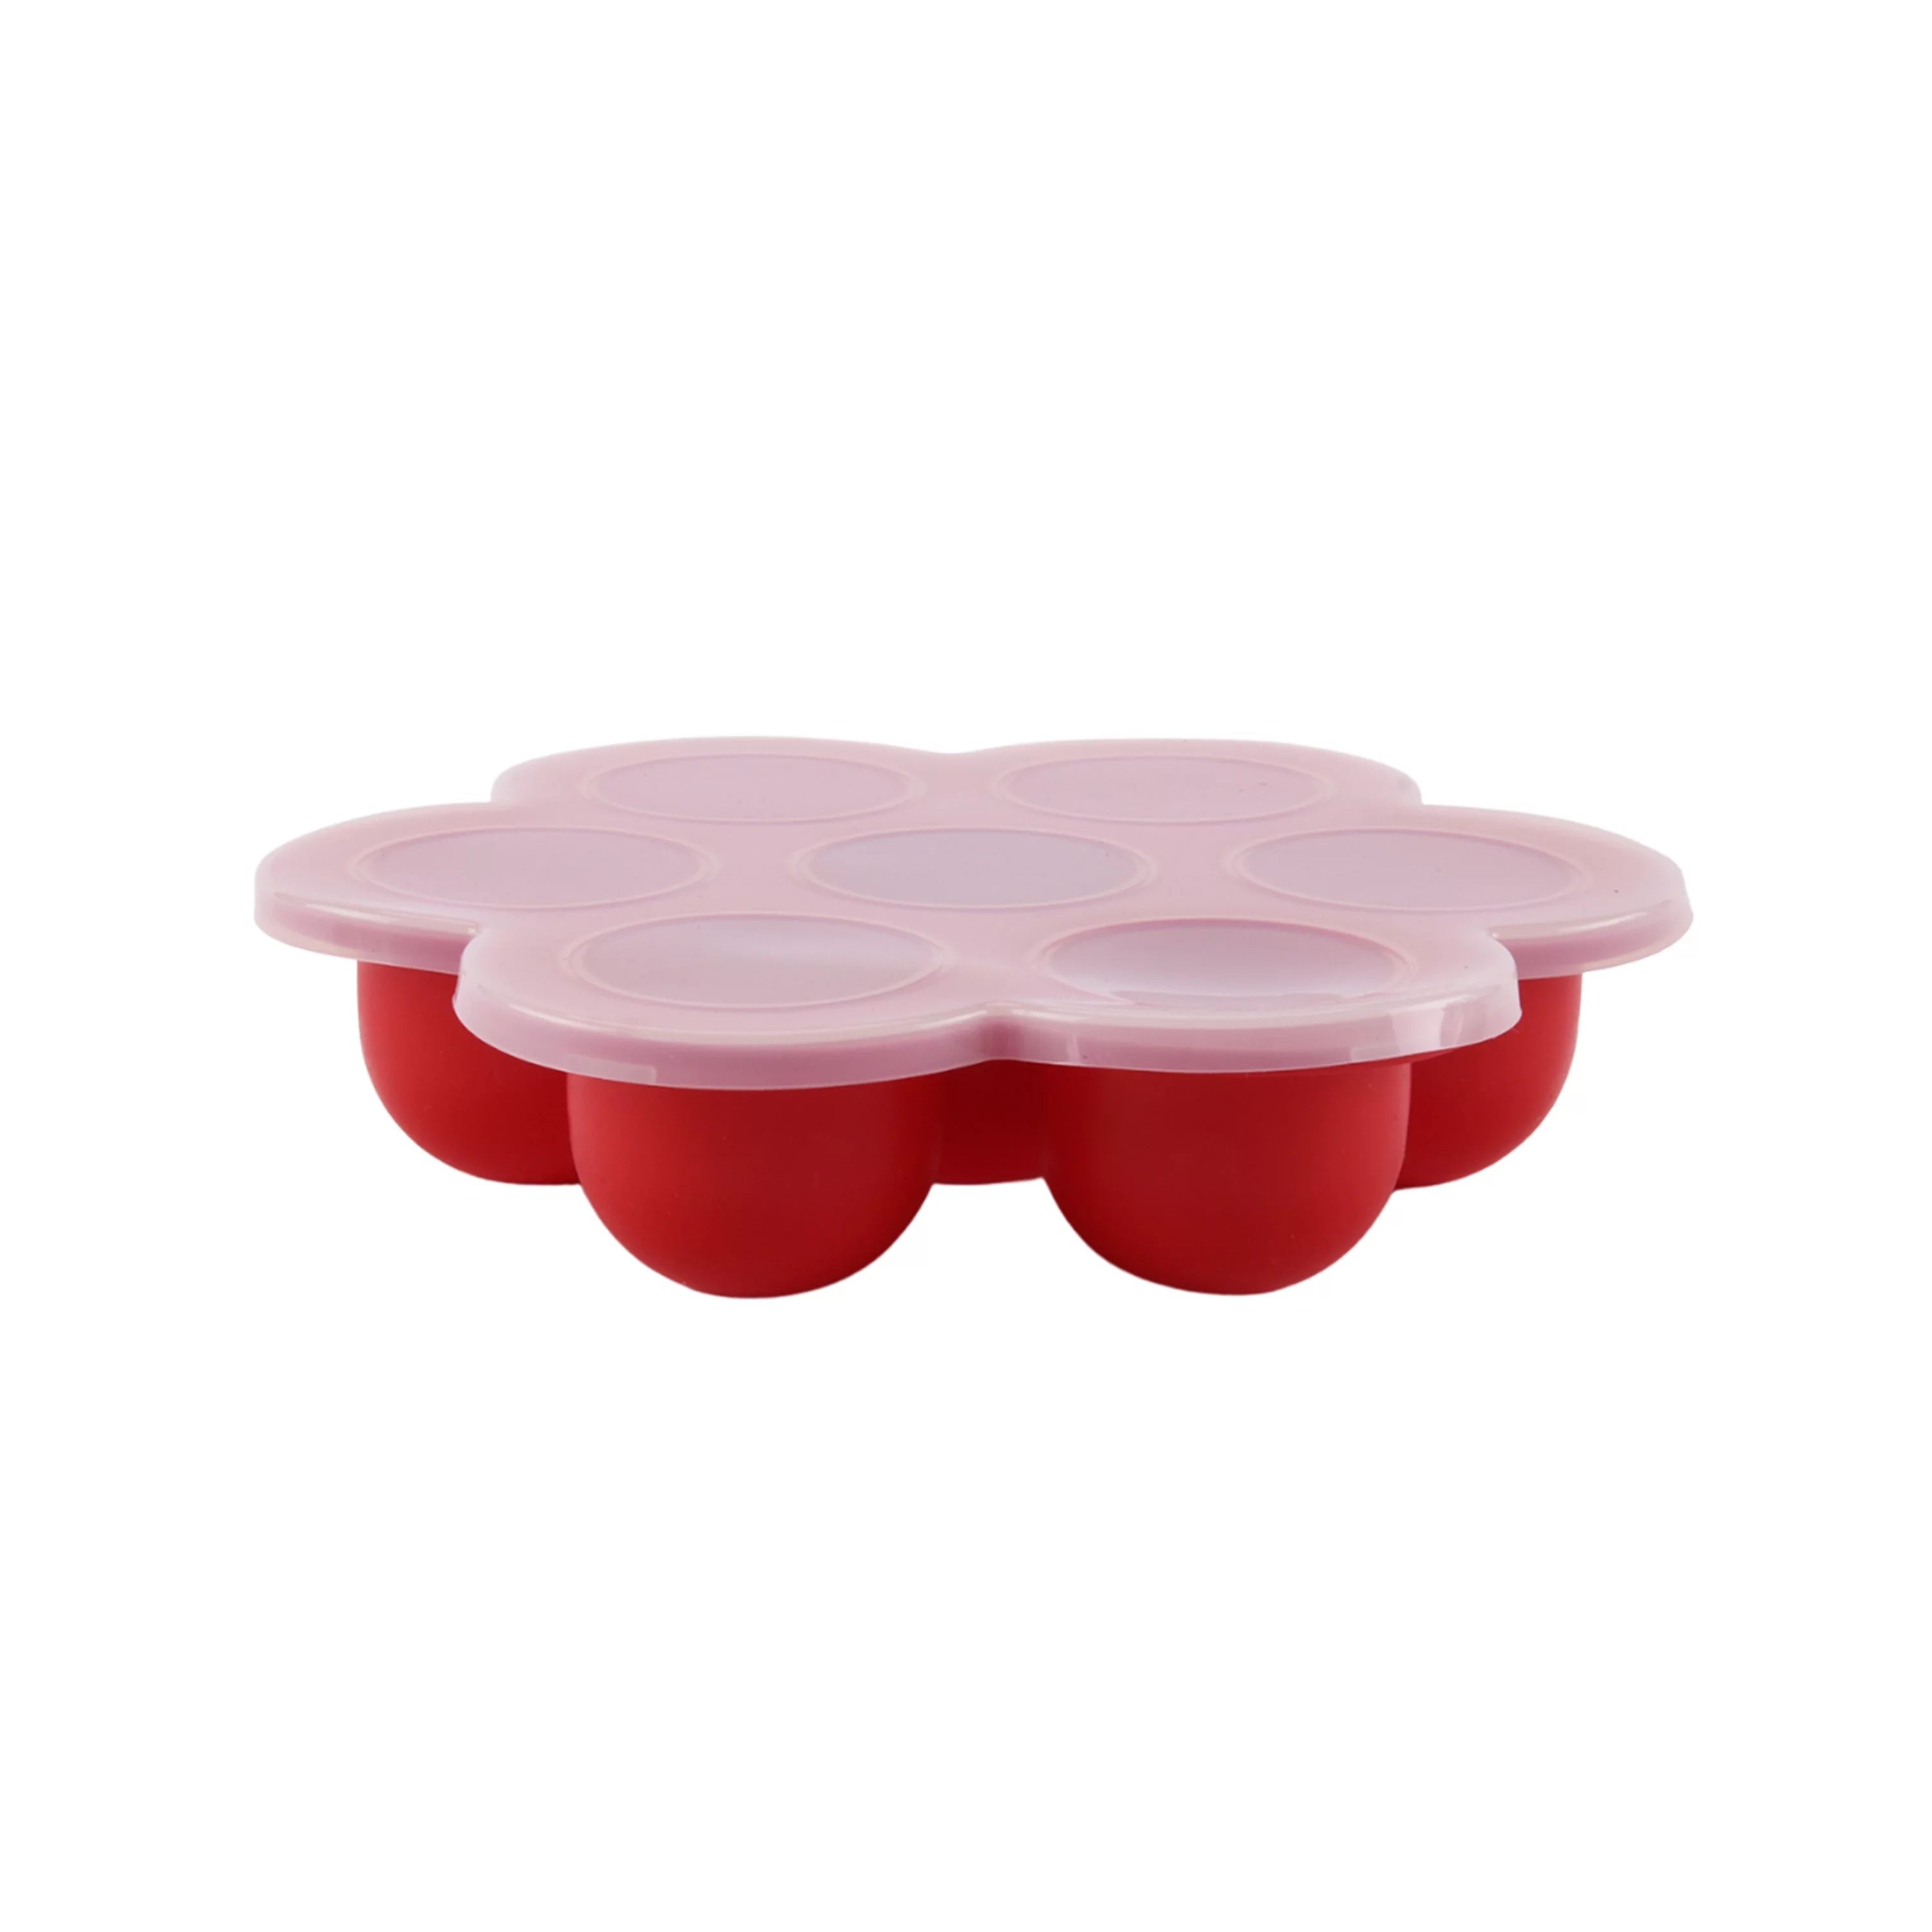 Mainstays Silicone Egg Bite Mold with Lid, Red | Walmart (US)